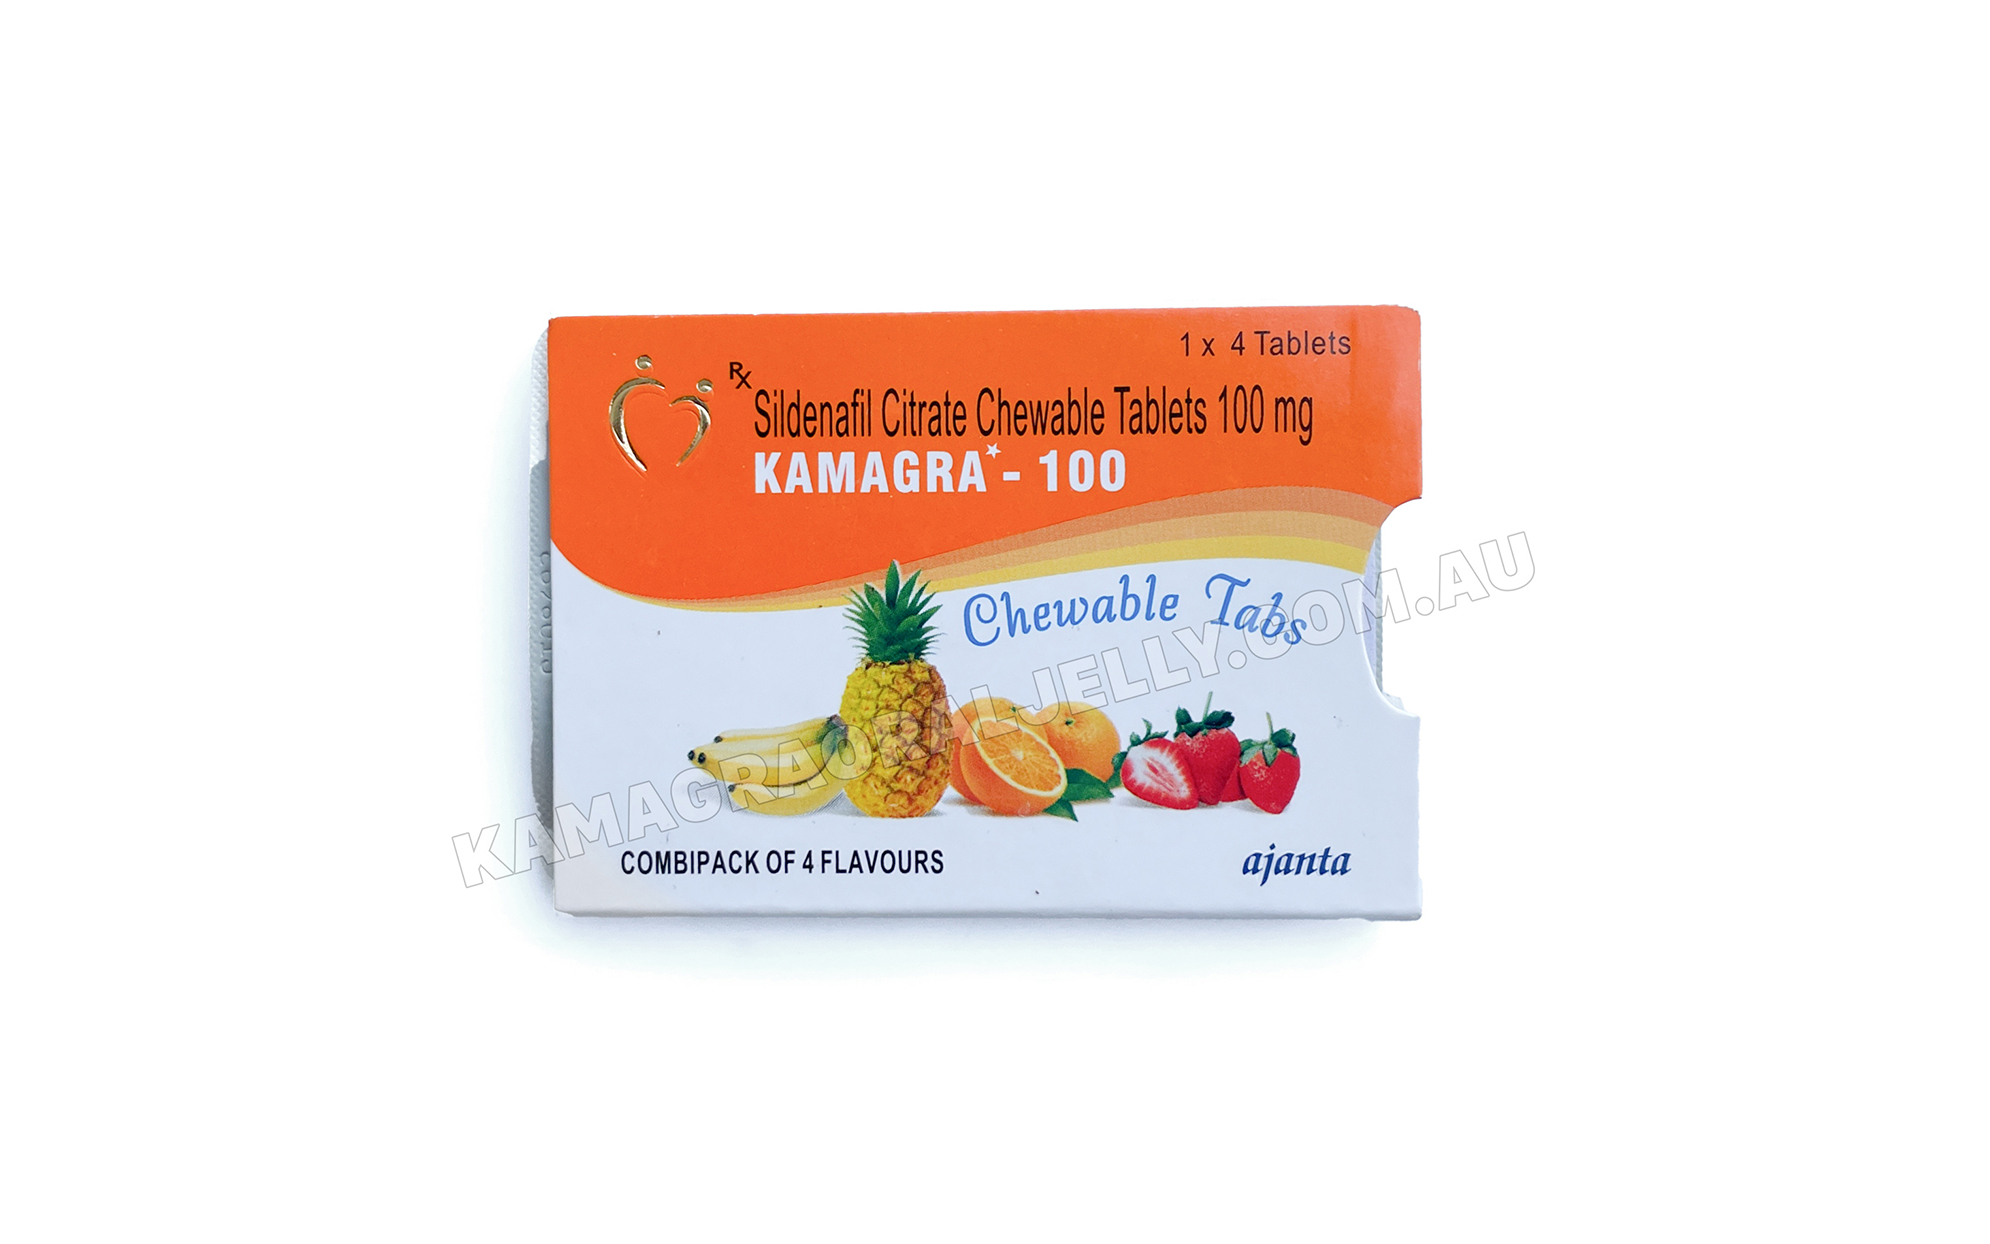 How to Use Kamagra Soft Chewable Tablets